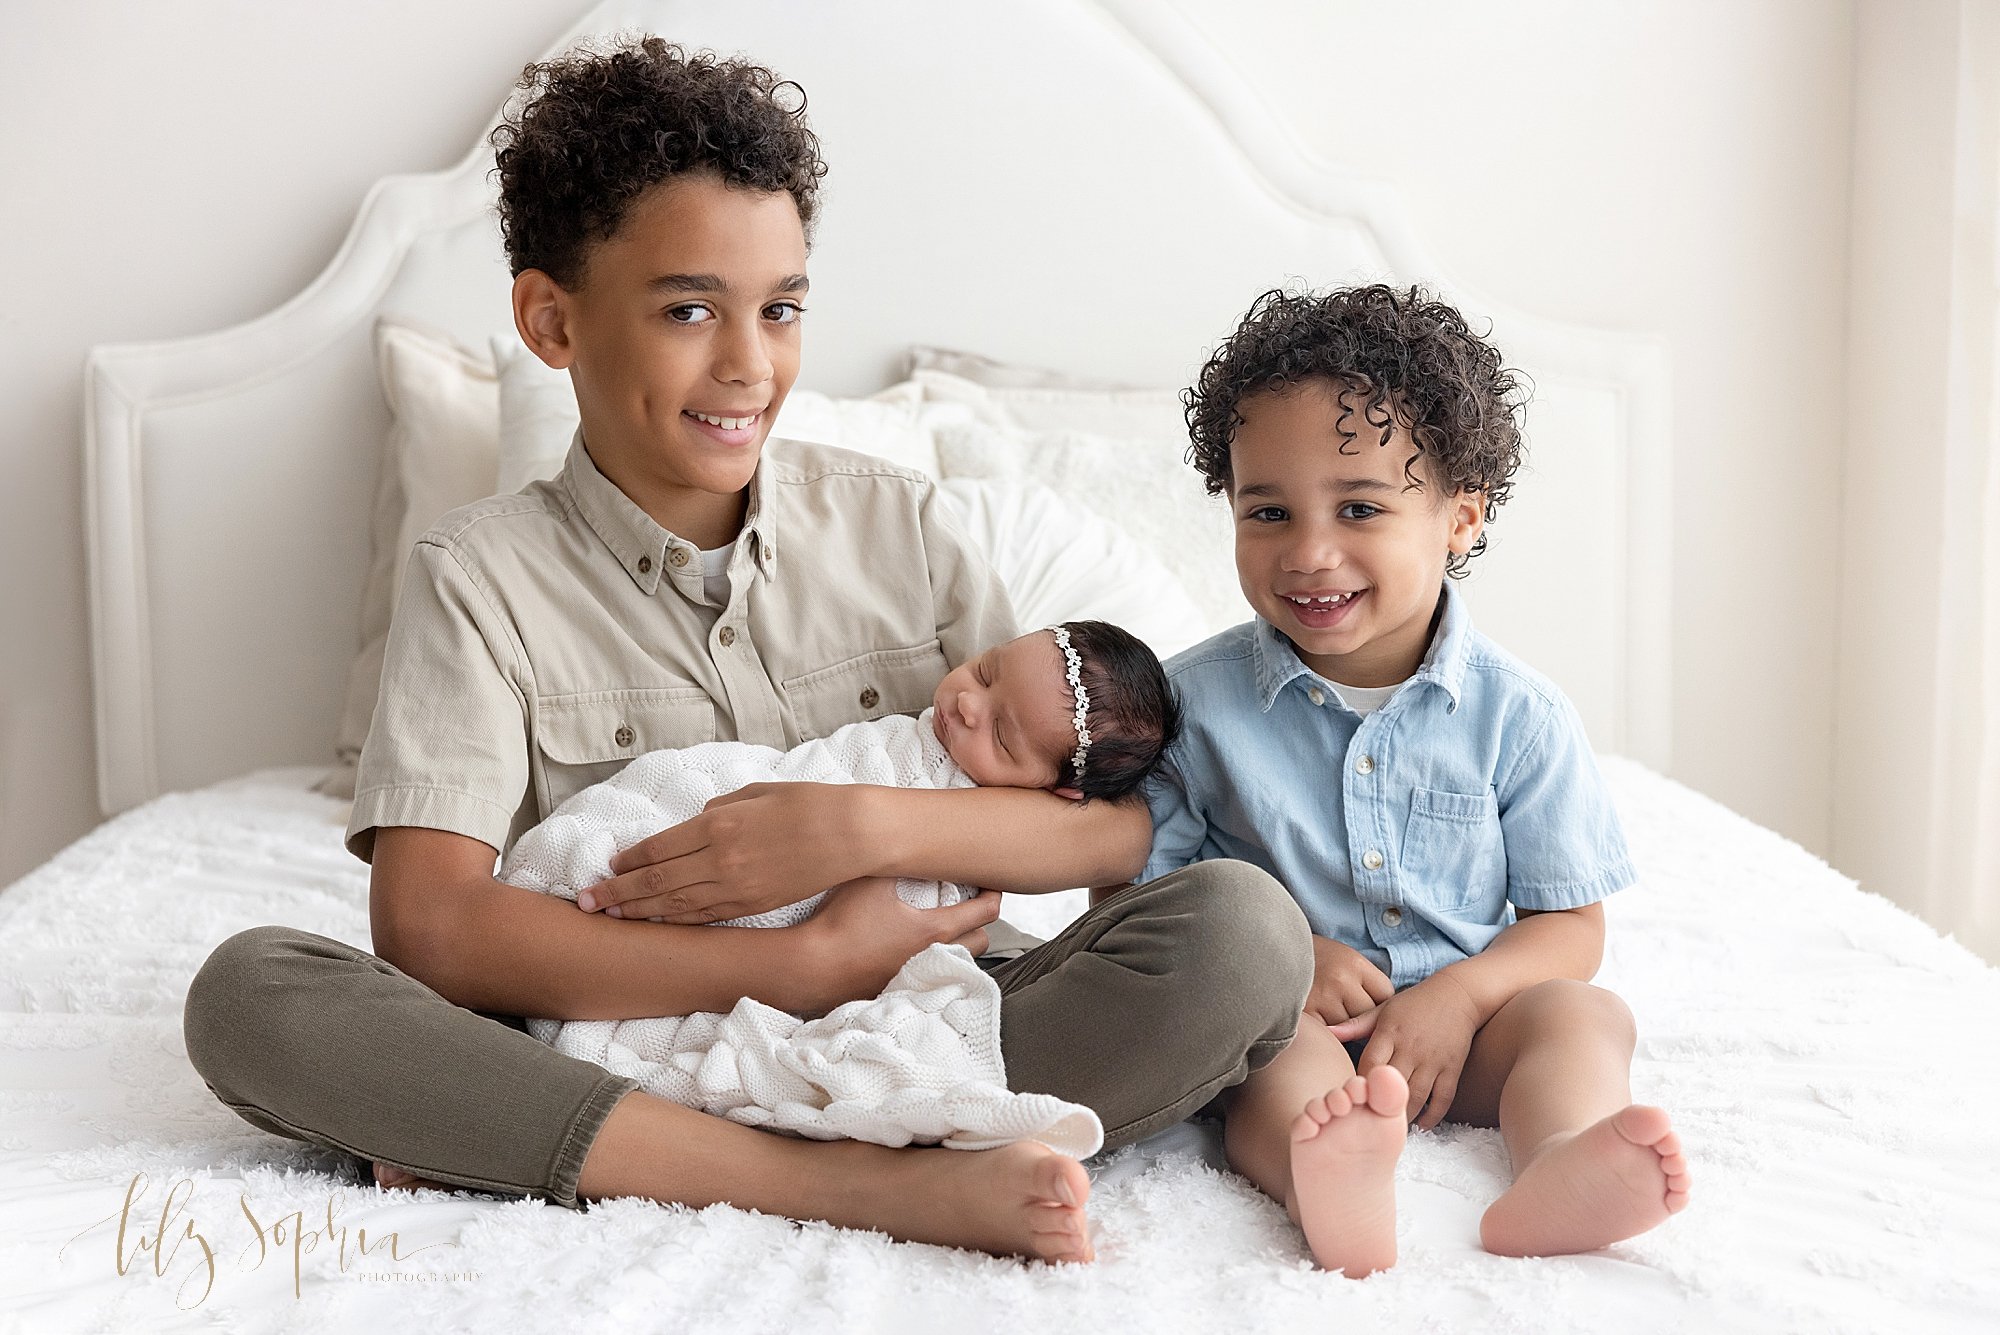  Family sibling portrait of a young boy cradling his newborn baby sister in is arms as he sits cross legged on a bed next to his toddler brother taken near Poncey Highlands in Atlanta in front of a window streaming natural light in a photography stud